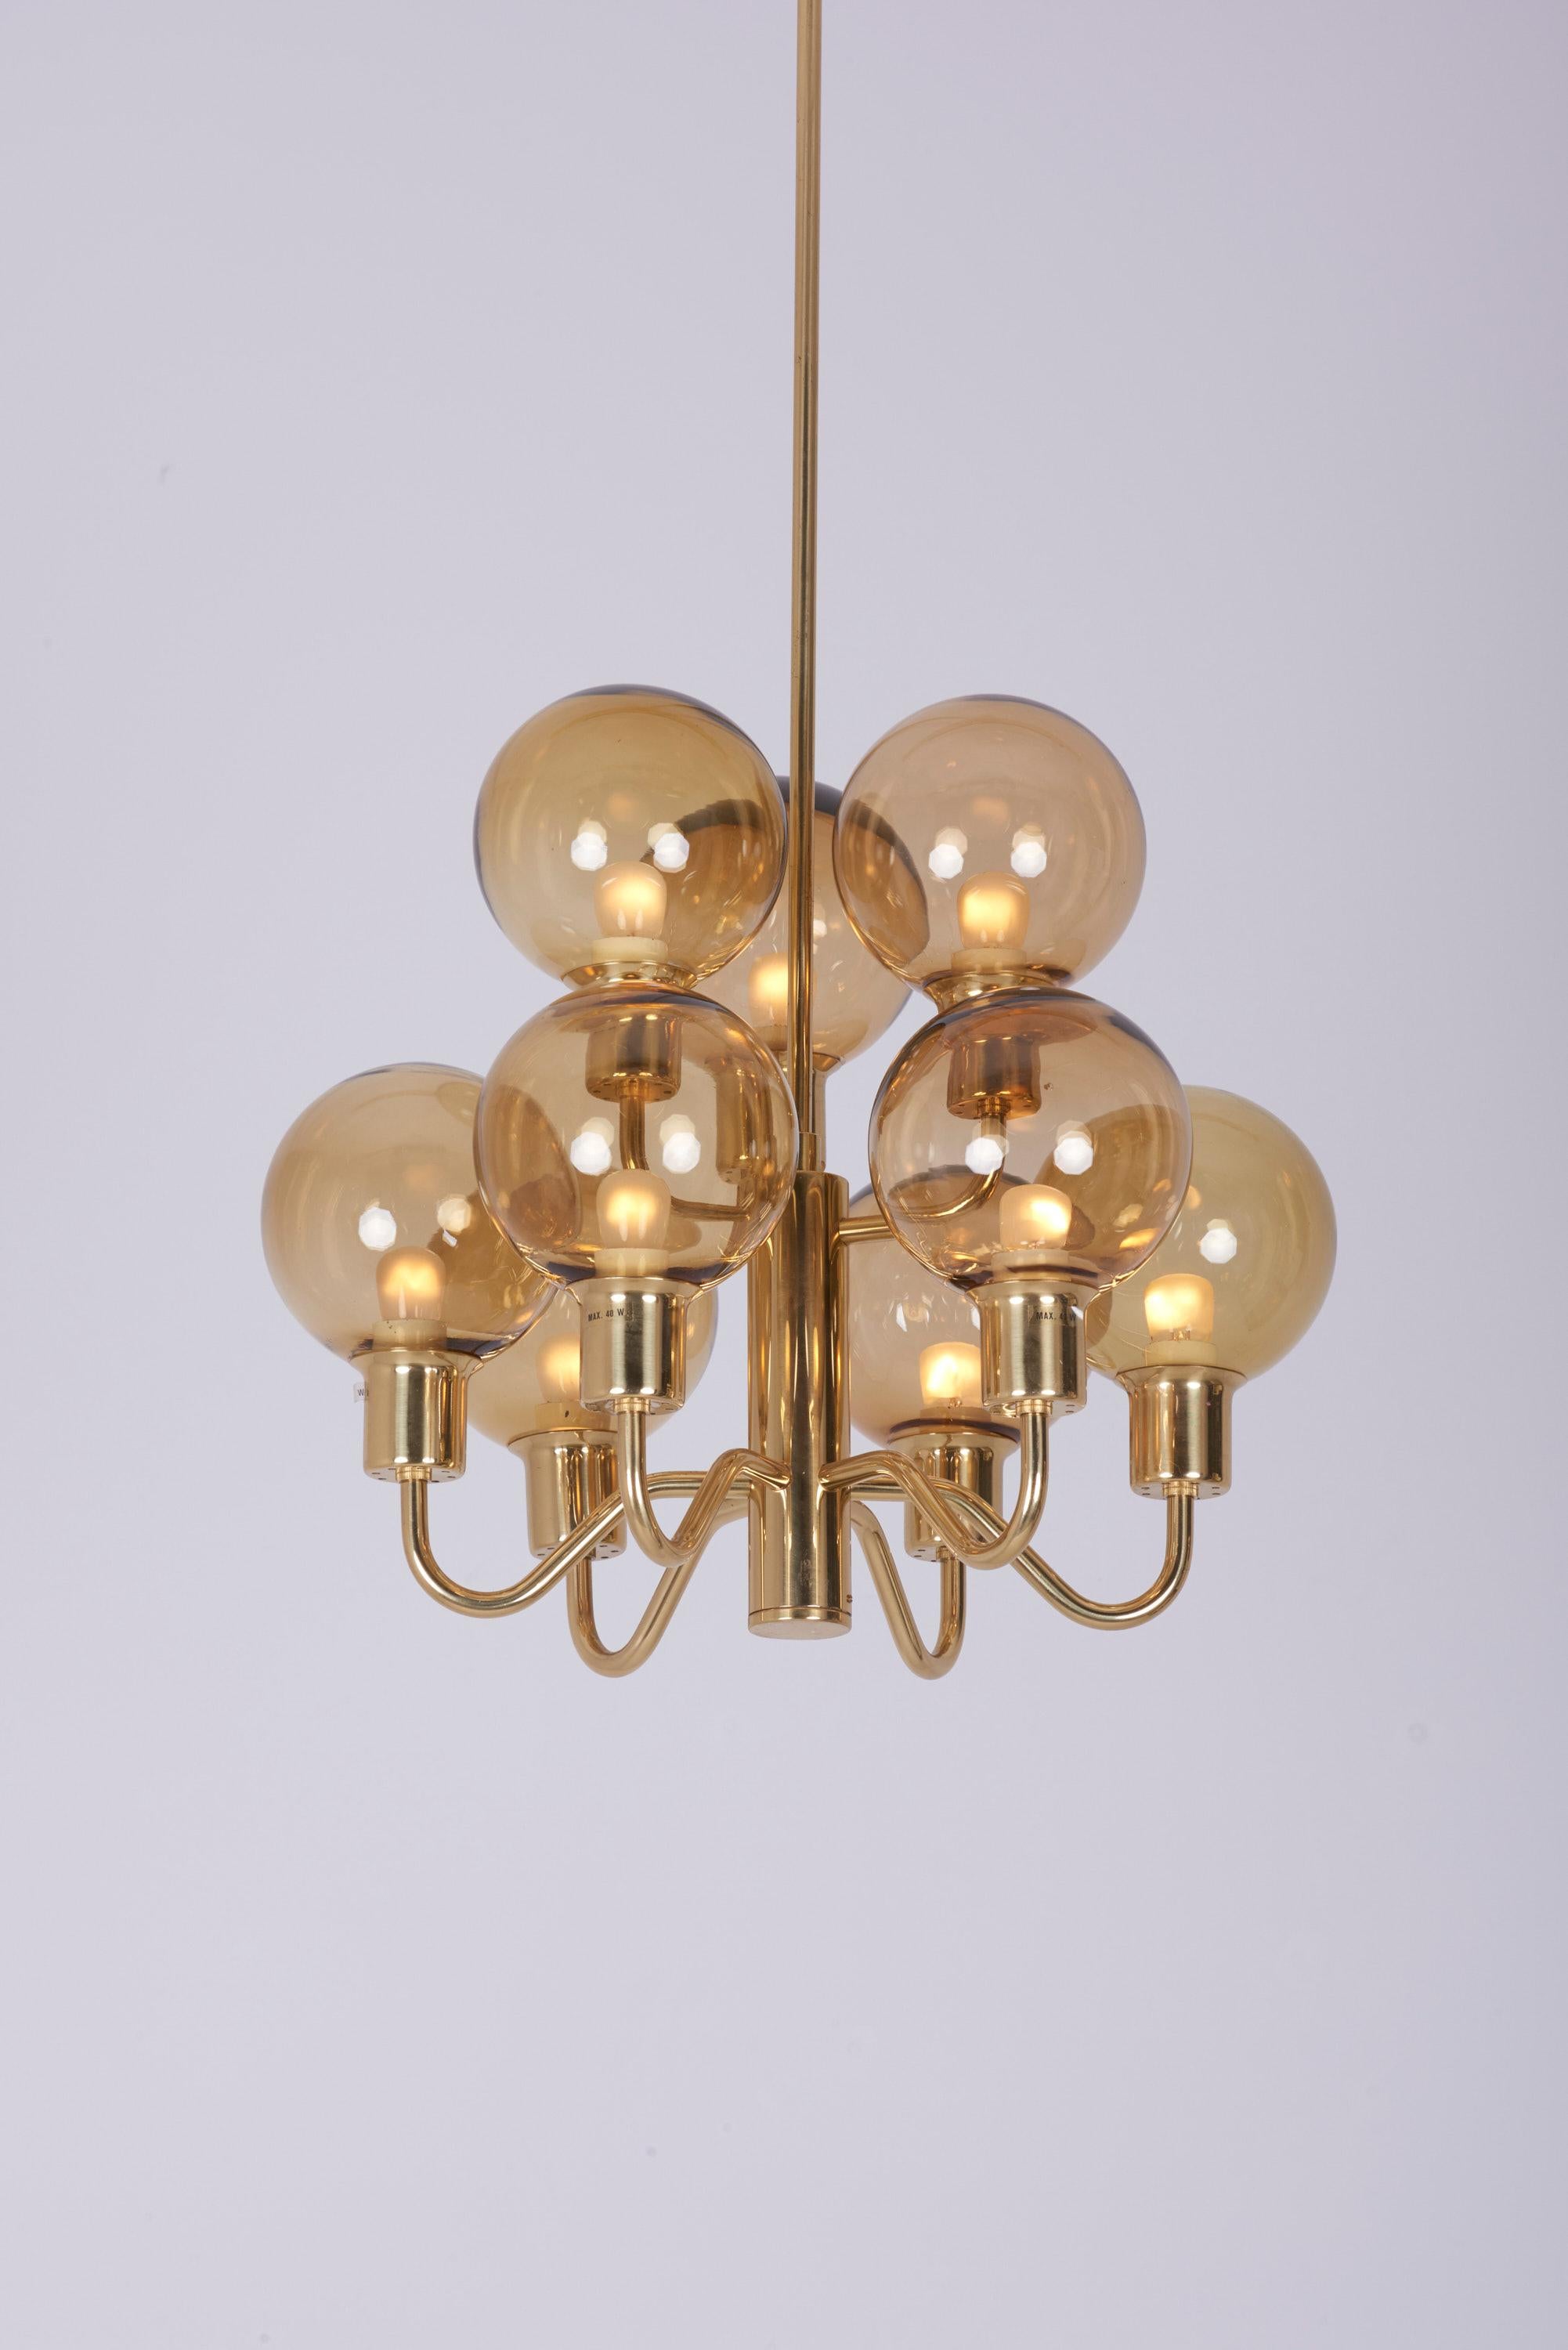 Brass and smoked glass ceiling lamp designed by Hans-Agne Jakobsson.
Produced in the 1960s by Hans-Agne Jakobsson AB in Markaryd Sweden.
9 x E 14 bulbs.

To be on the safe side, the lamp should be checked locally by a specialist concerning local